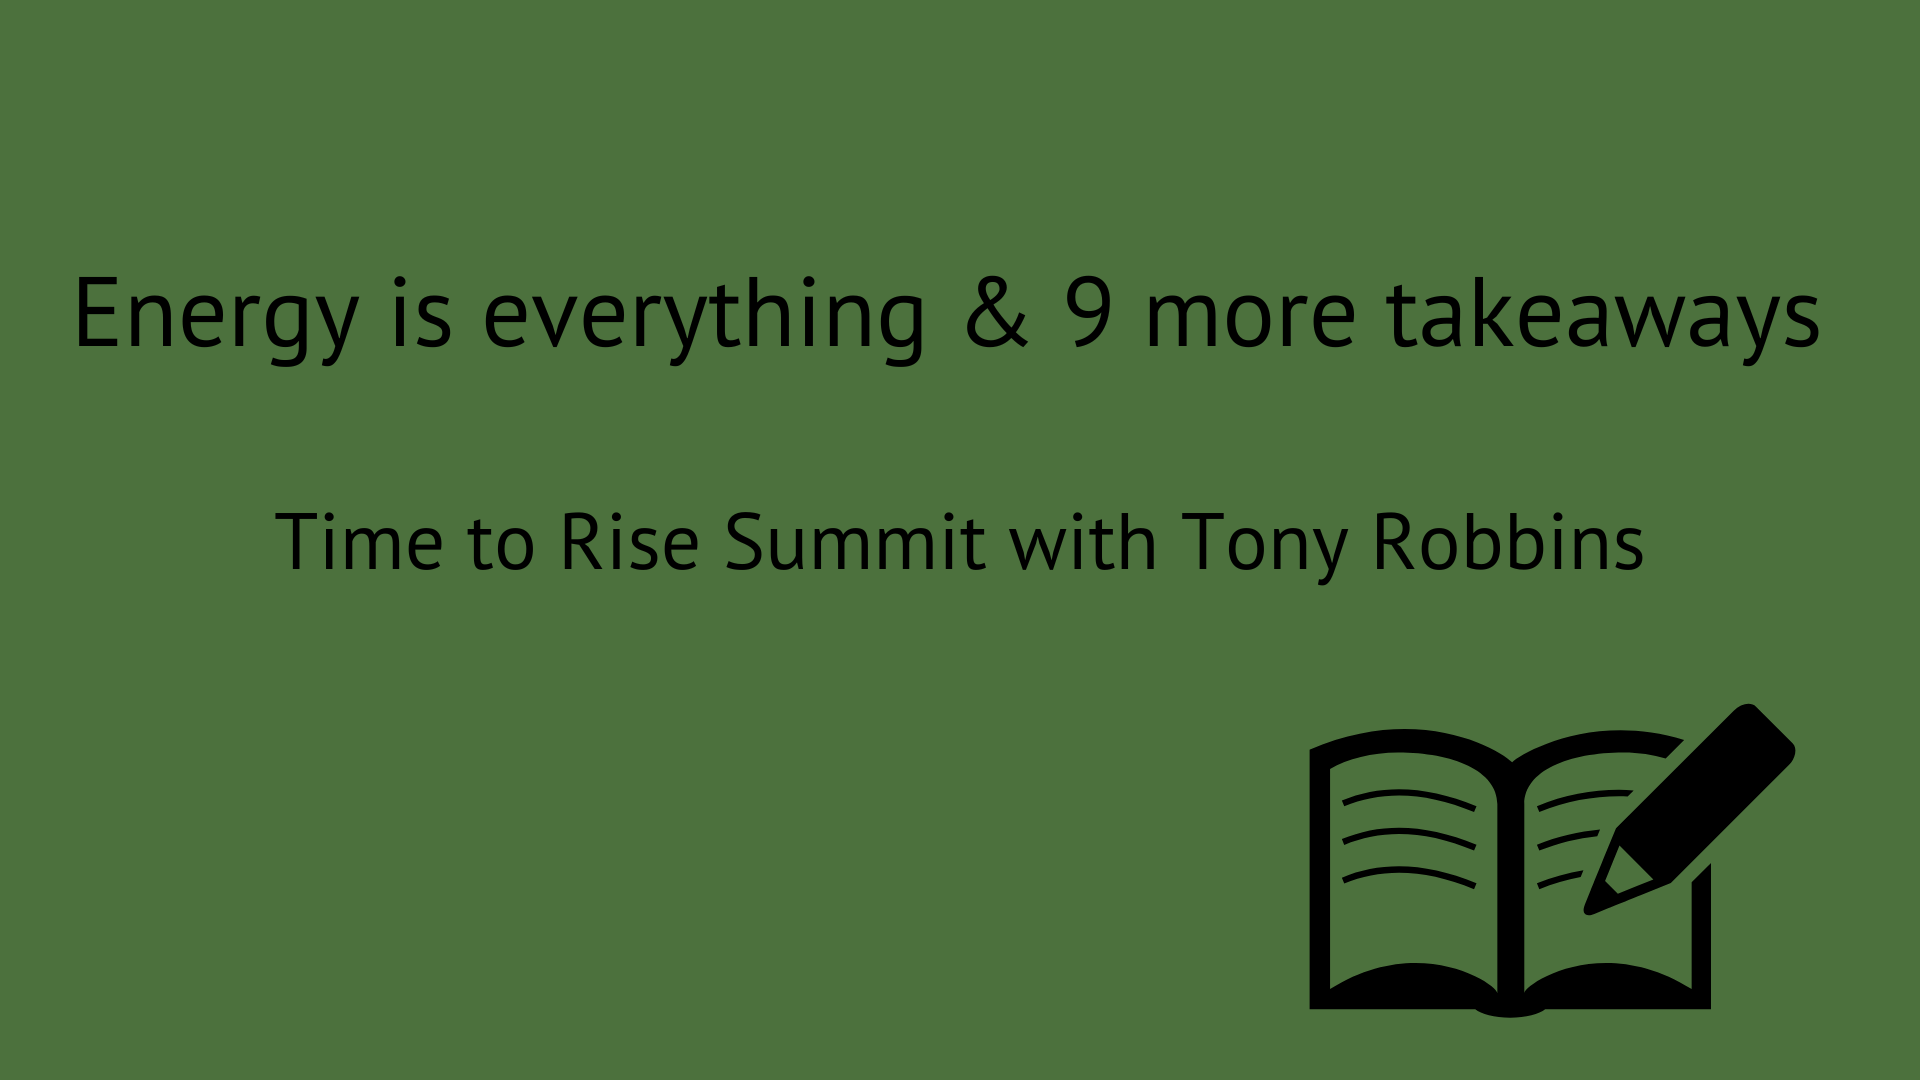 10 key lessons learned from Tony Robbins